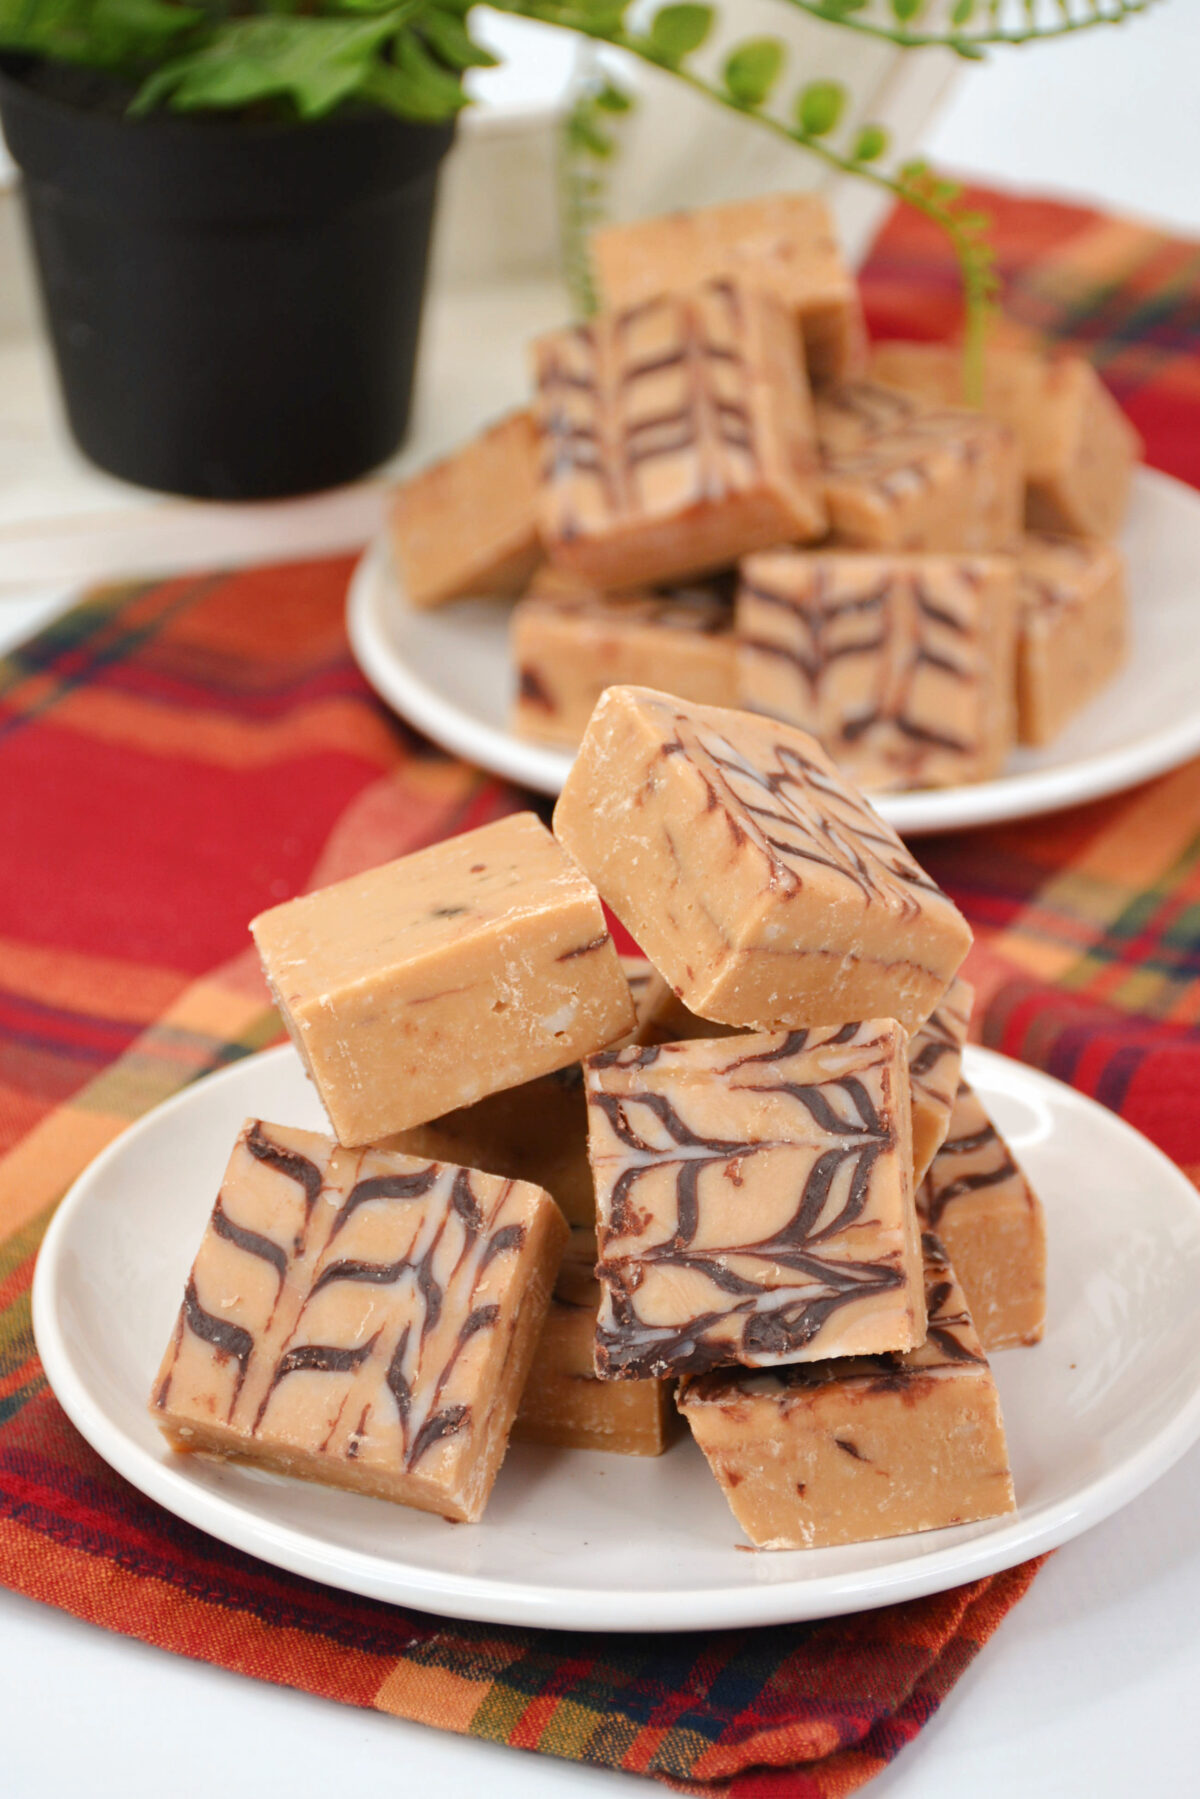 Impress your guests with our decadent Mocha Rum Fudge. This creamy and flavorful indulgence is simple to make using just a few ingredients!